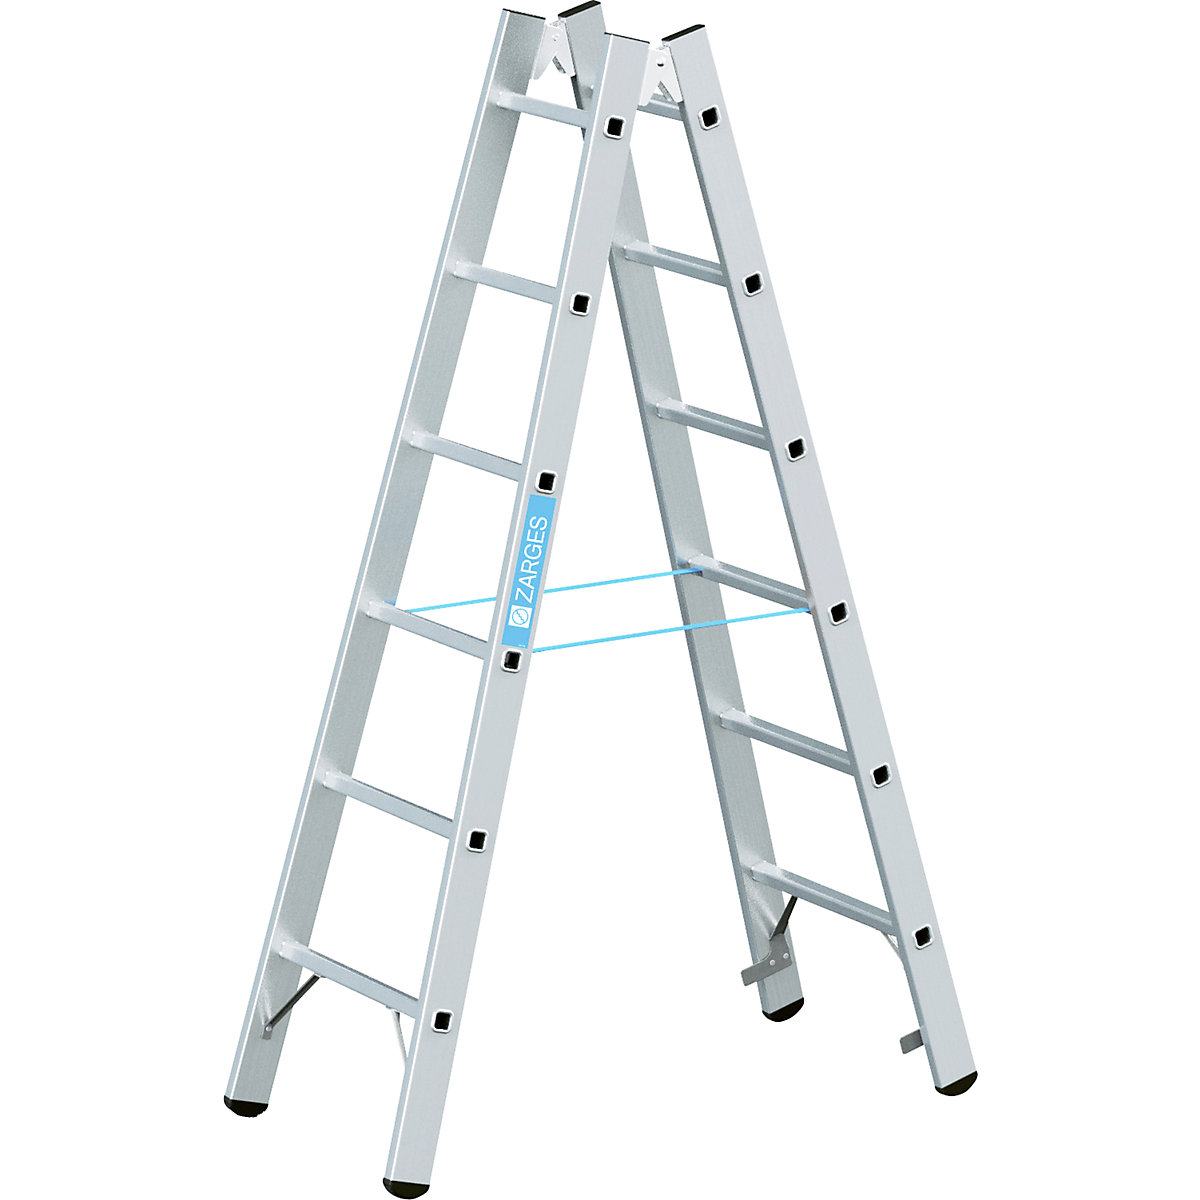 Professional rung ladder – ZARGES, double sided, 2 x 6 rungs-7